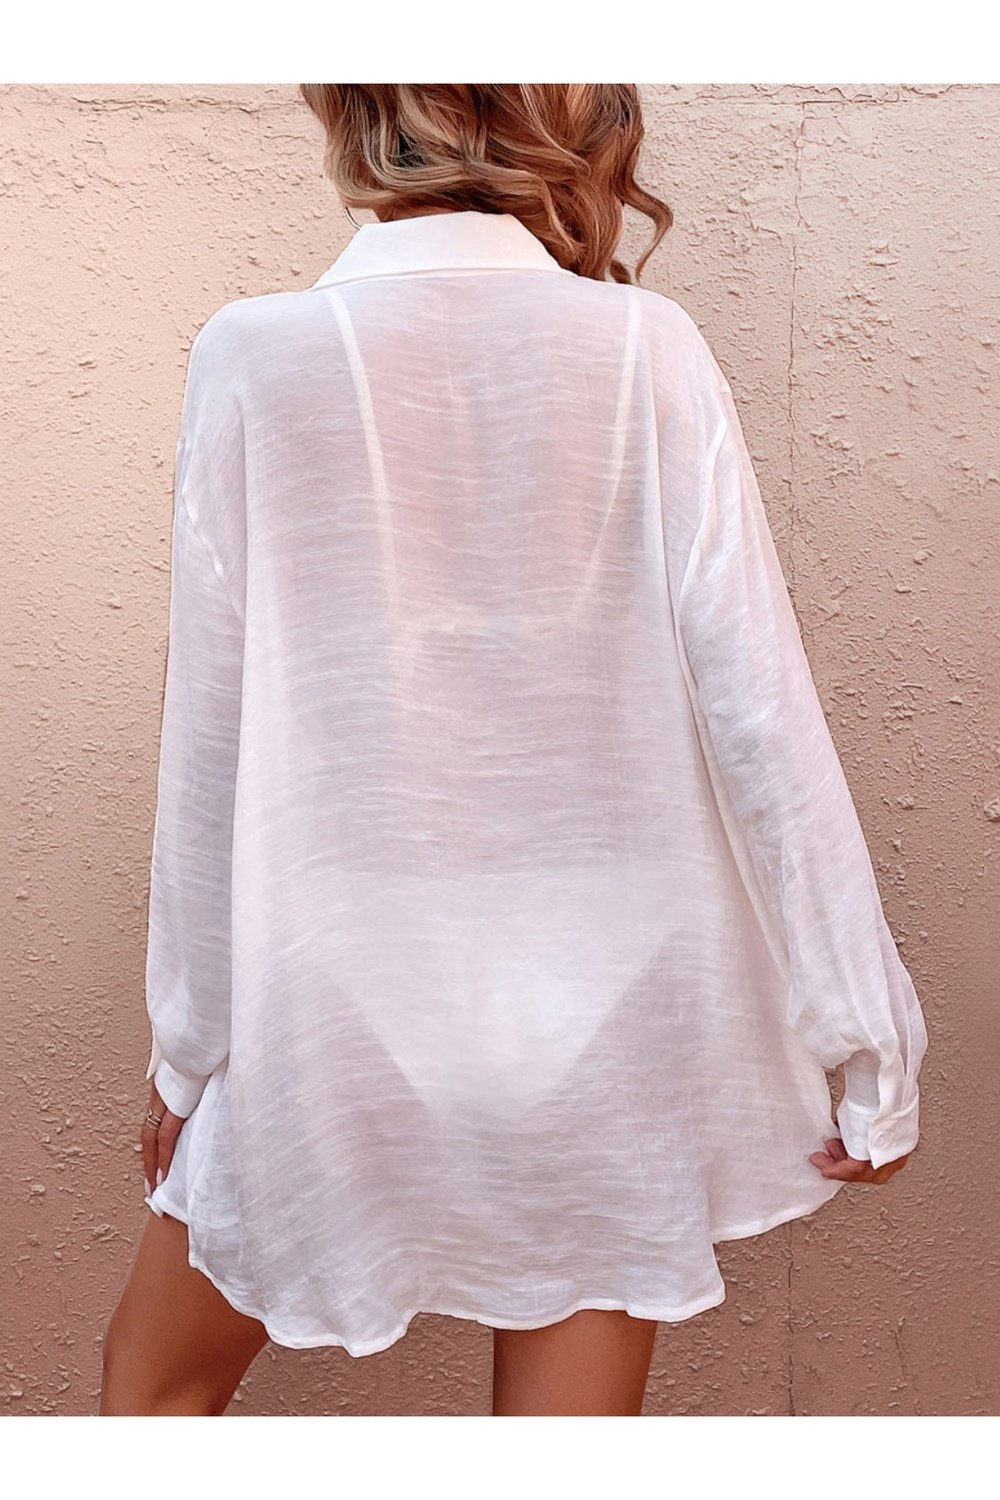 Pocketed Dropped Shoulder Cover Up - Cover-Ups - FITGGINS